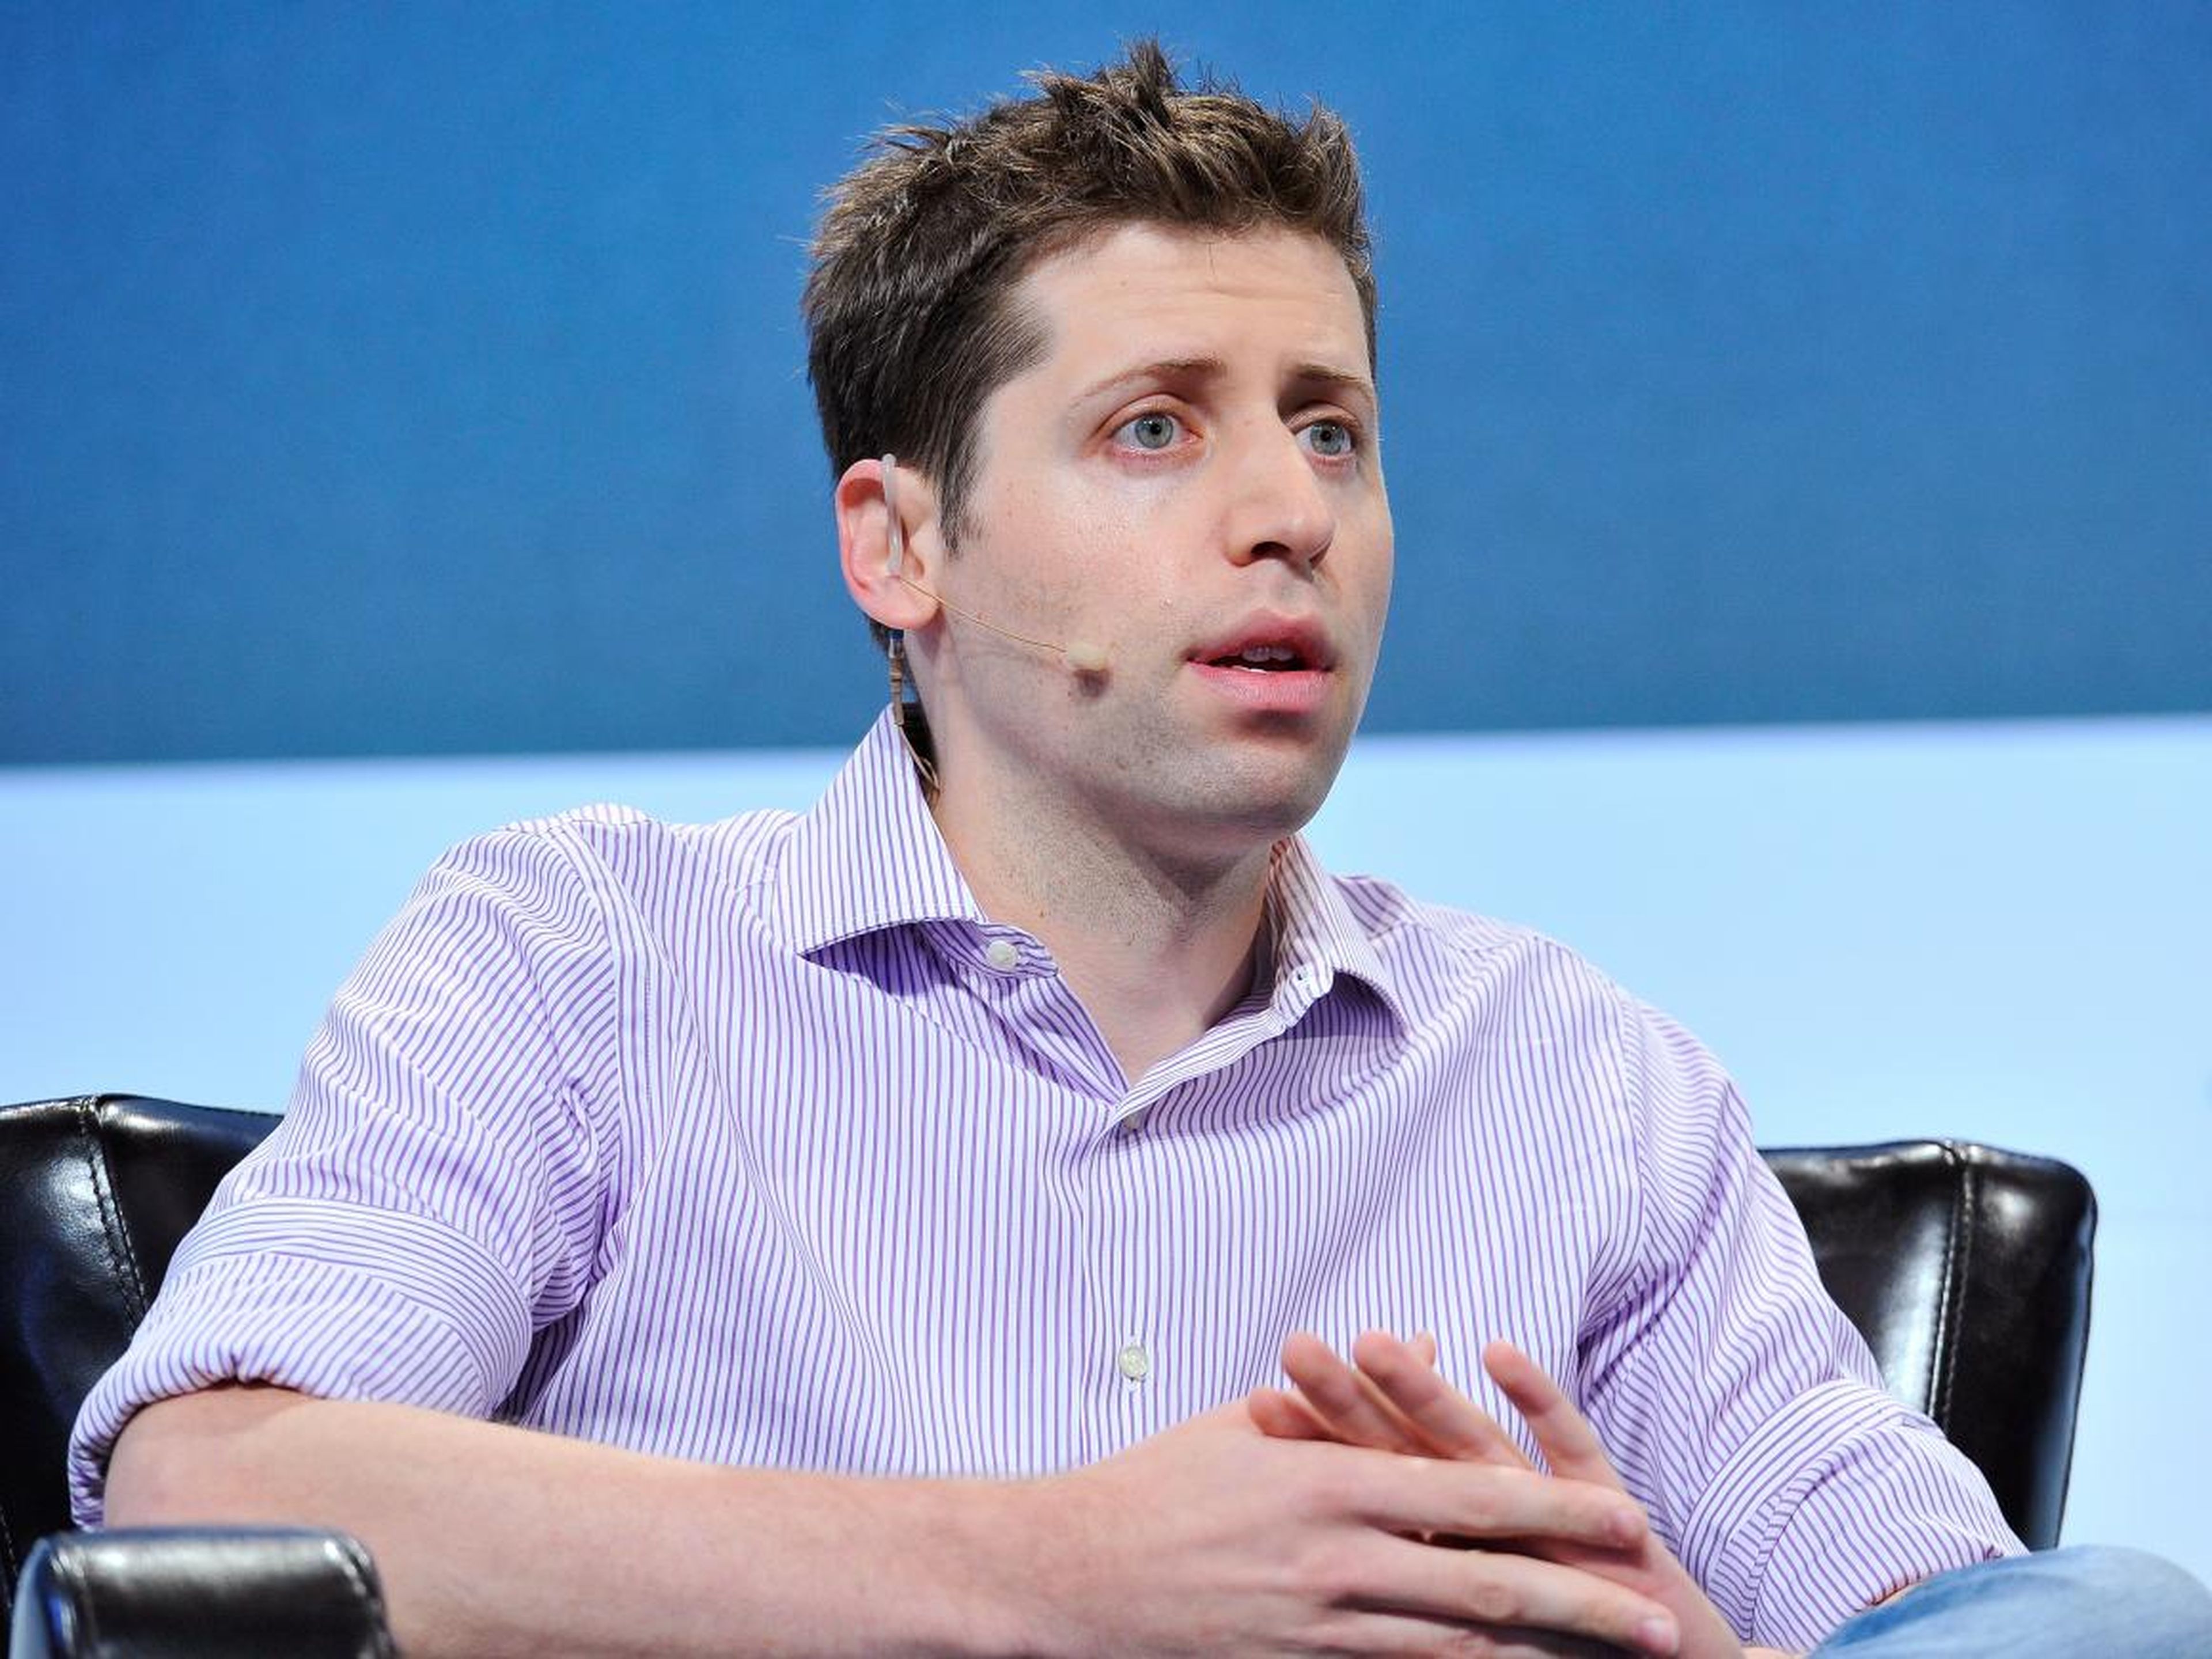 Y Combinator aims to provide basic income to thousands of Americans.